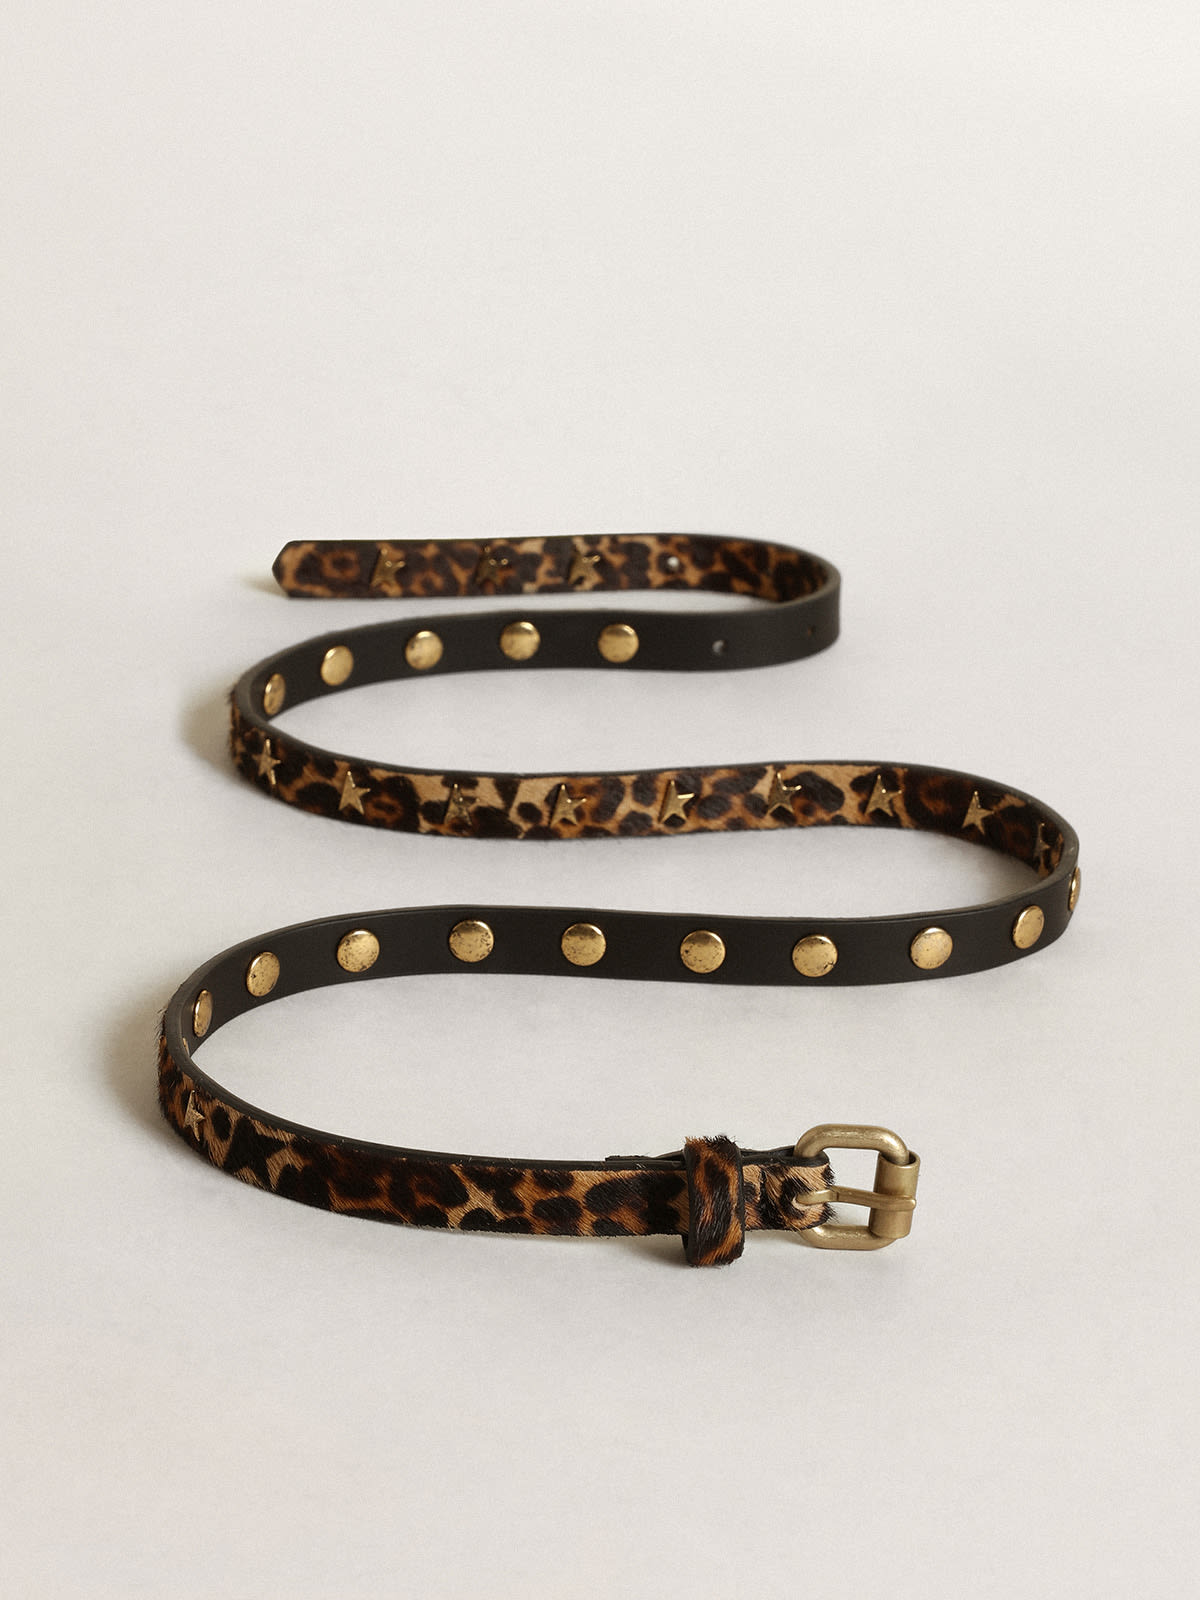 Golden Goose - Women's belt in black and brown leopard print pony skin with studs in 